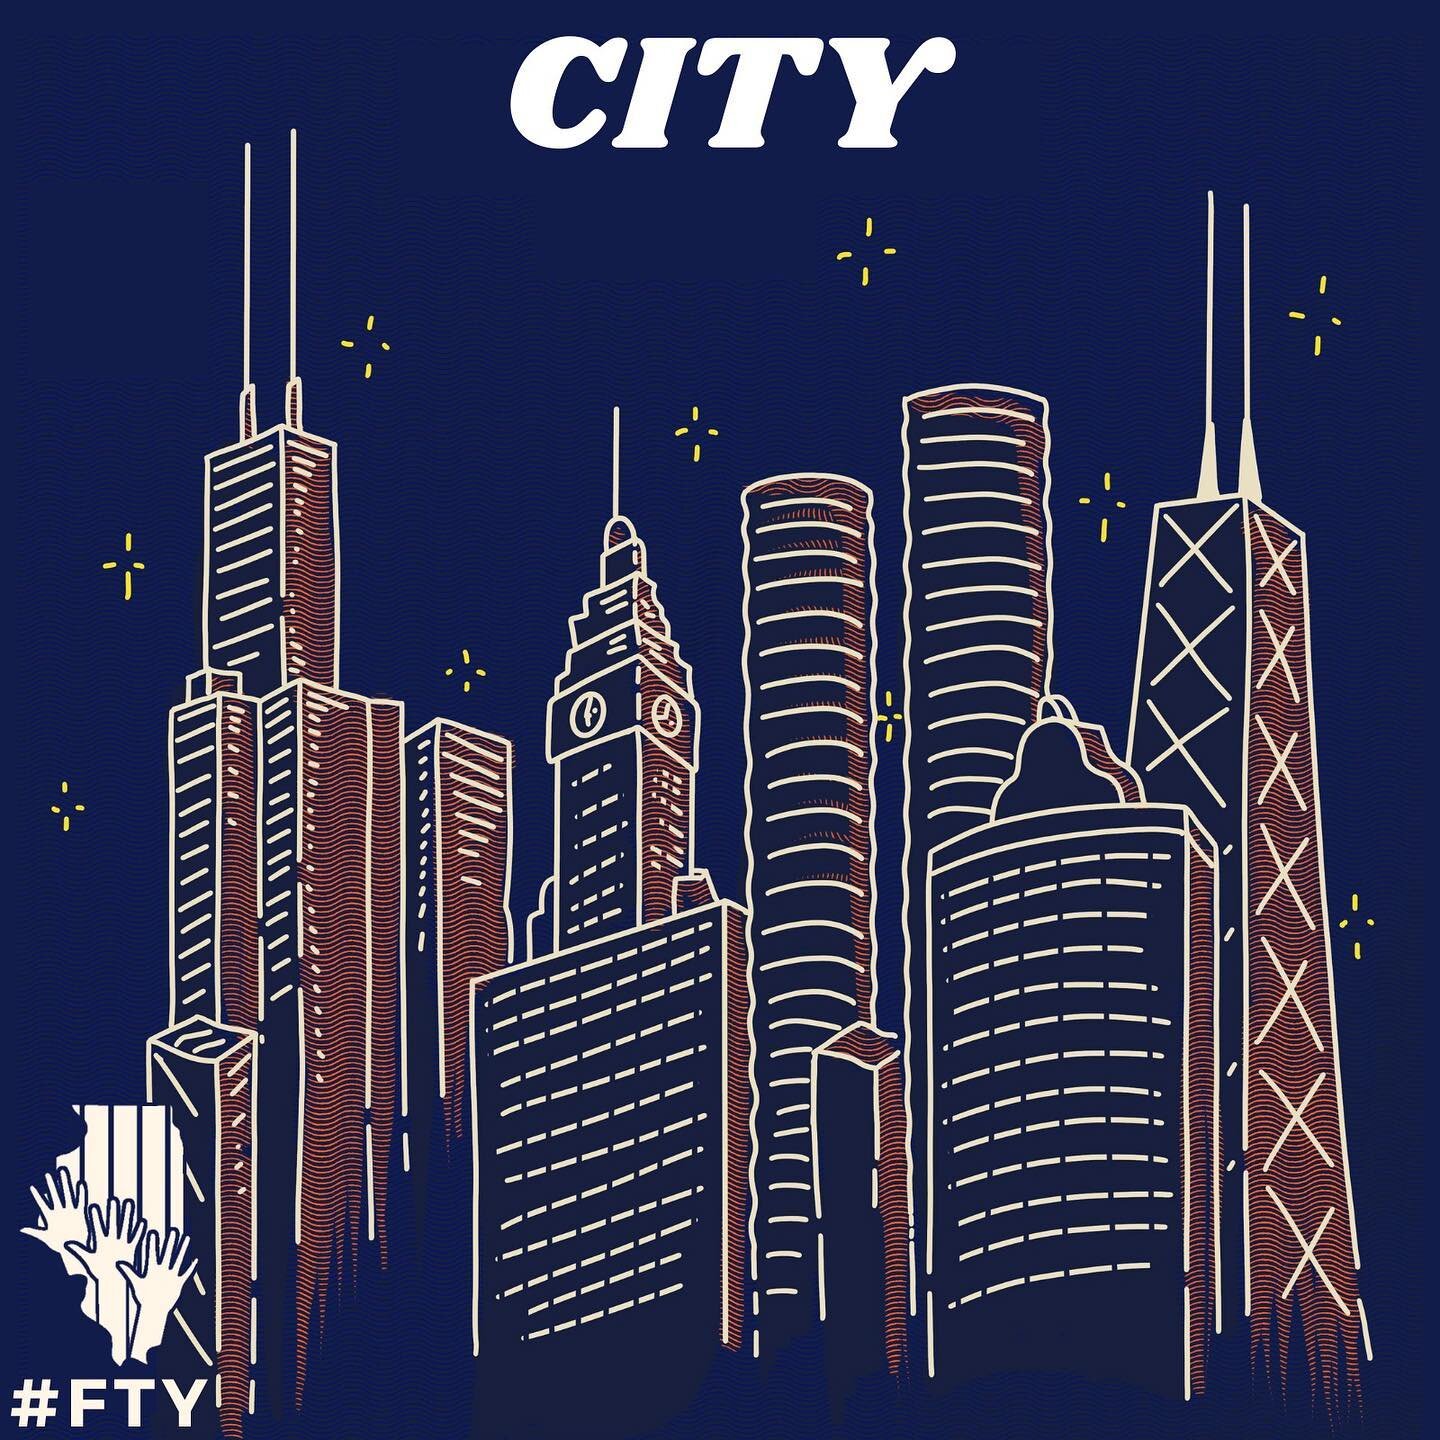 🎧FREE THE YOUTH PODCAST, EPISODE 3: CITY is live! Available on Spotify and Apple Podcasts.

In Episode 3: Policing, we explore the impact of policing on communities. Our hosts Sheriff and Malika speak with Destiny Bell, a local Chicago organizer fro